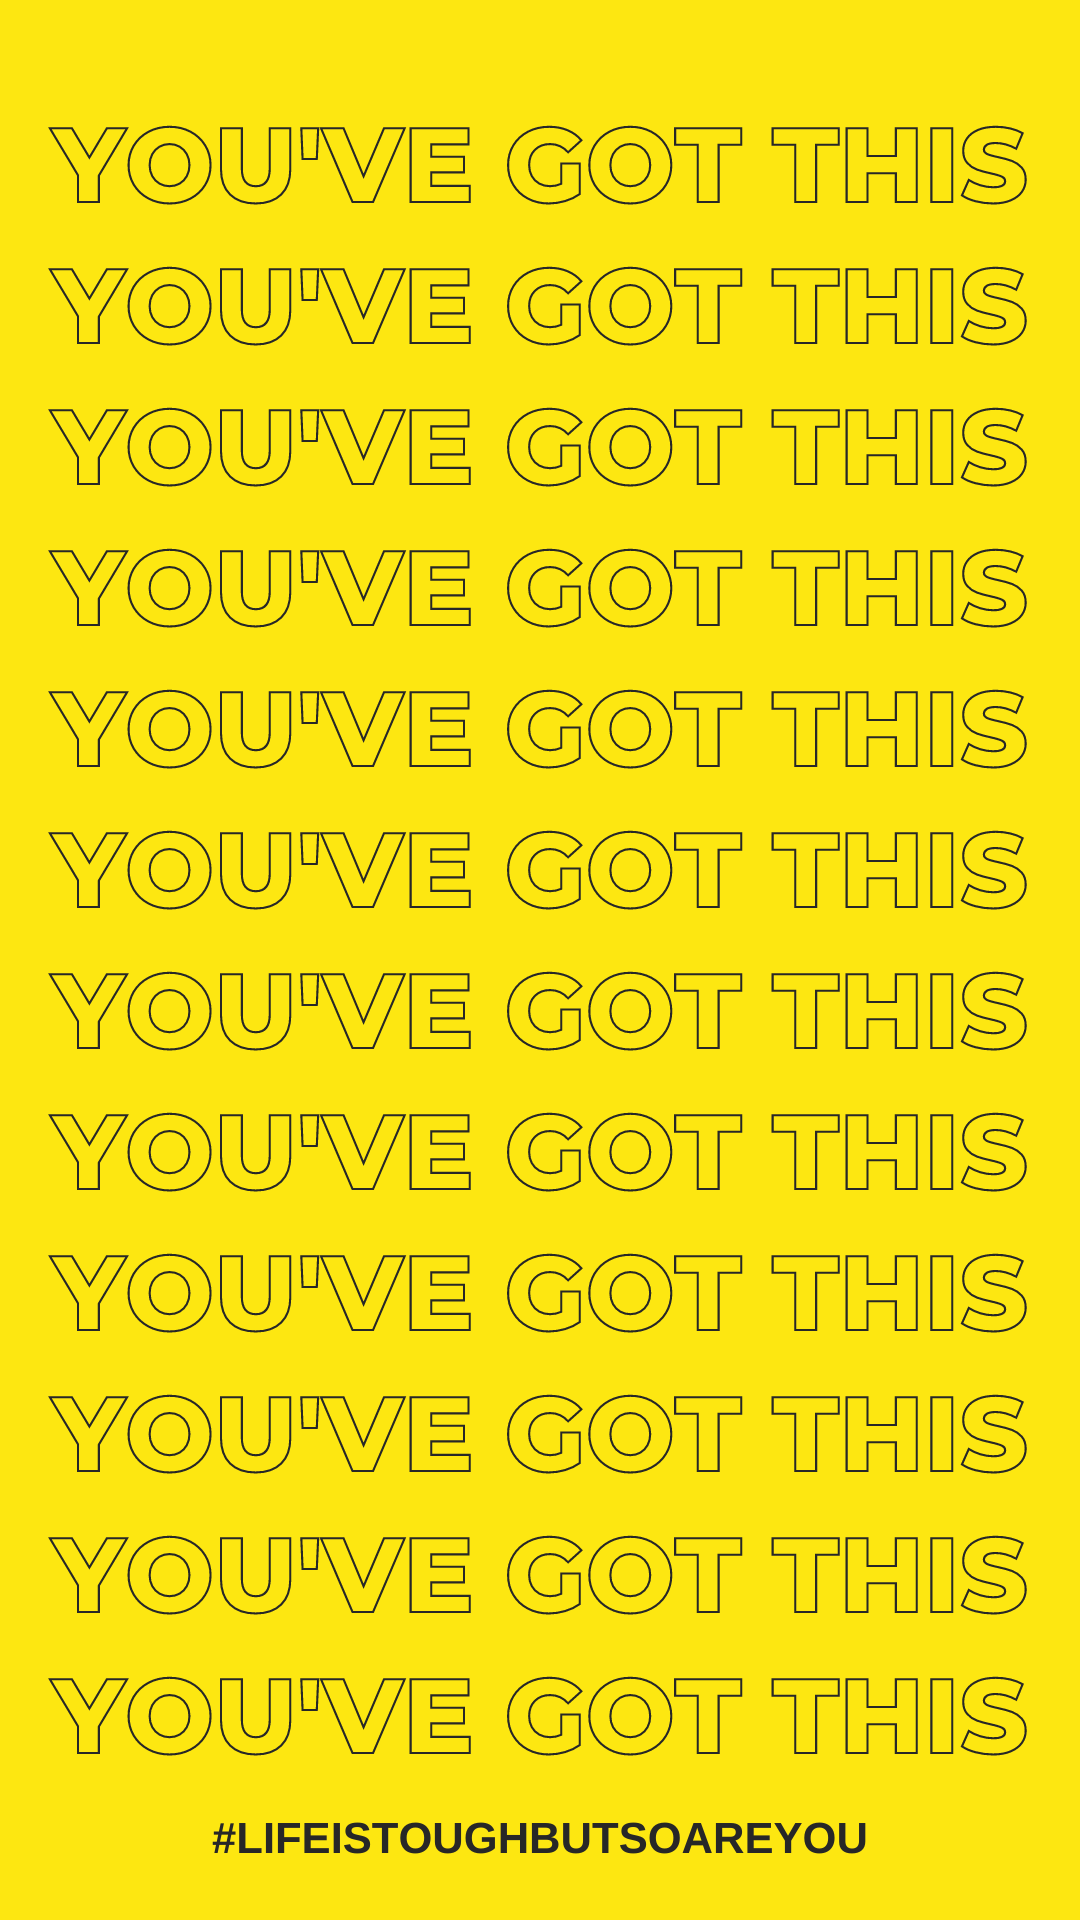 You Got This